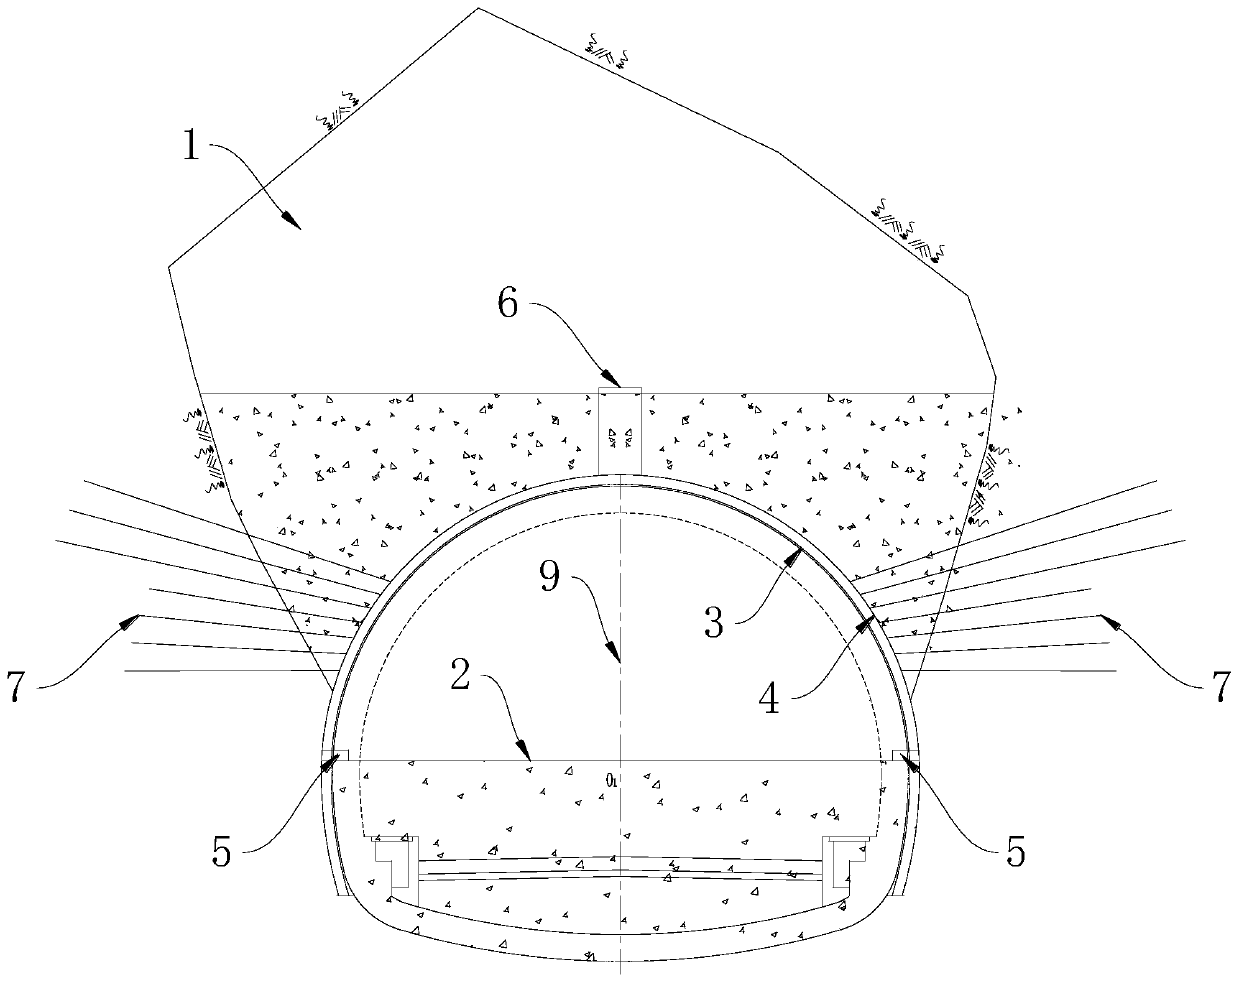 Tunnel collapse handling method for convergent collapse cavity